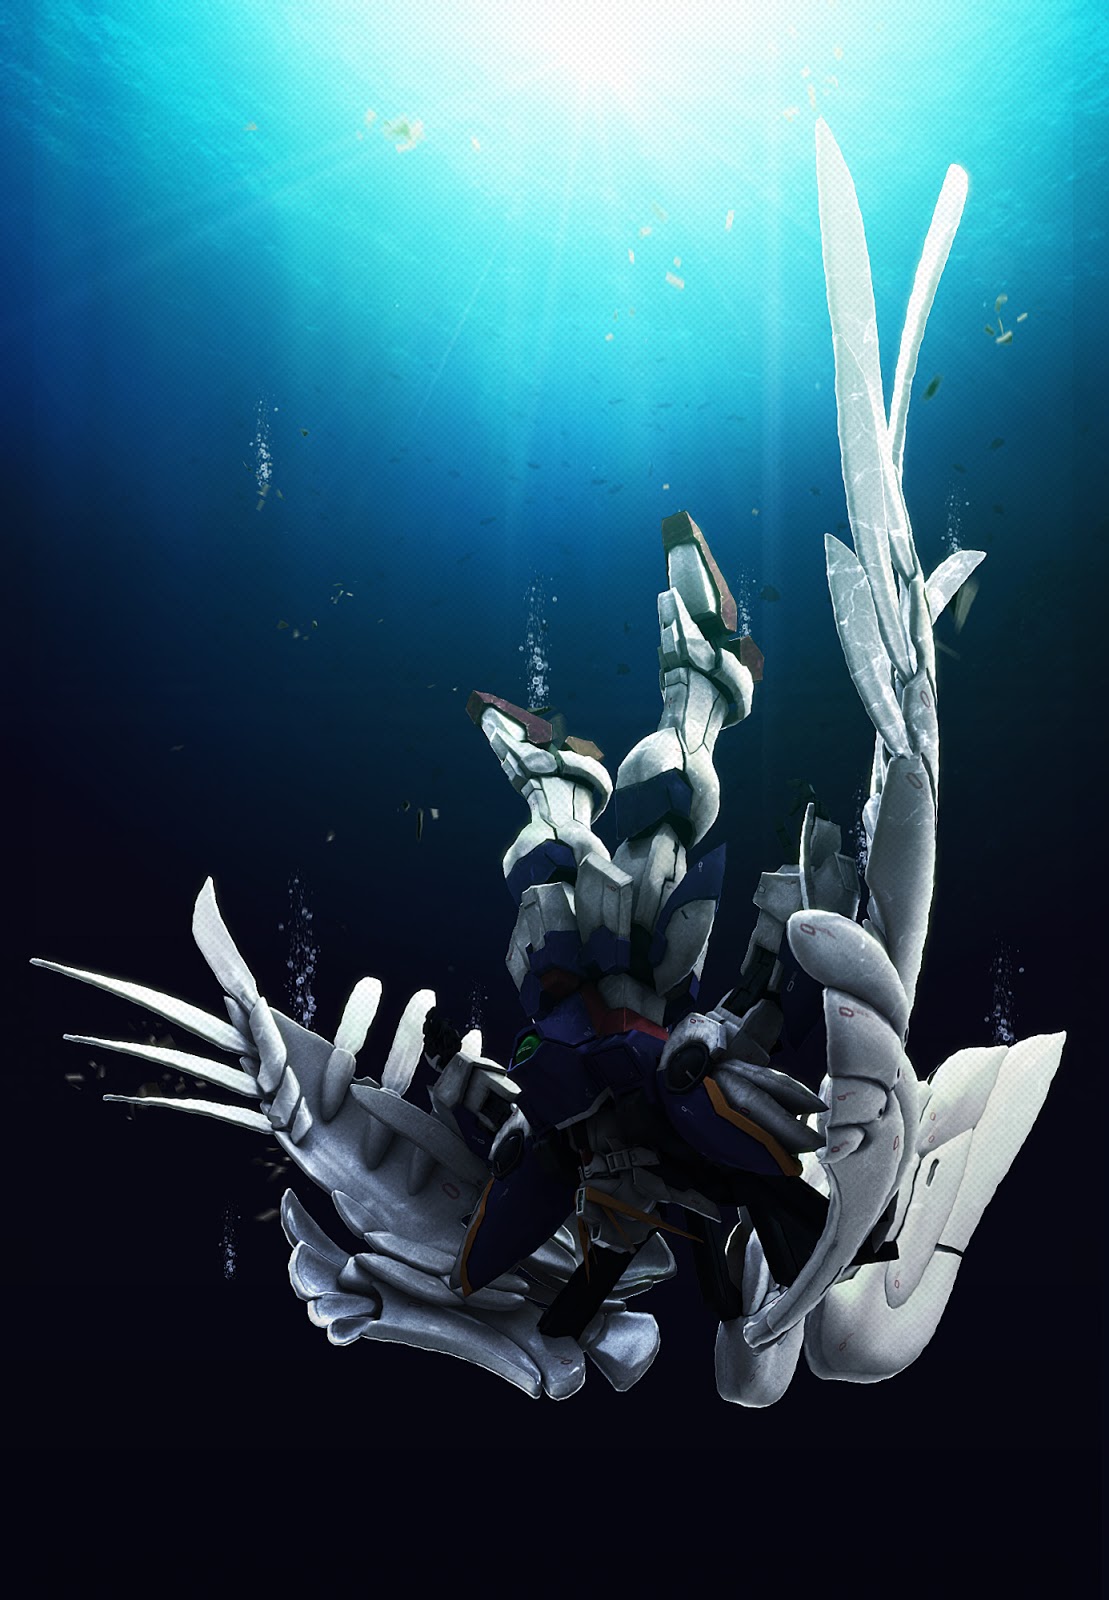 Wing Zero Wallpapers Group 76